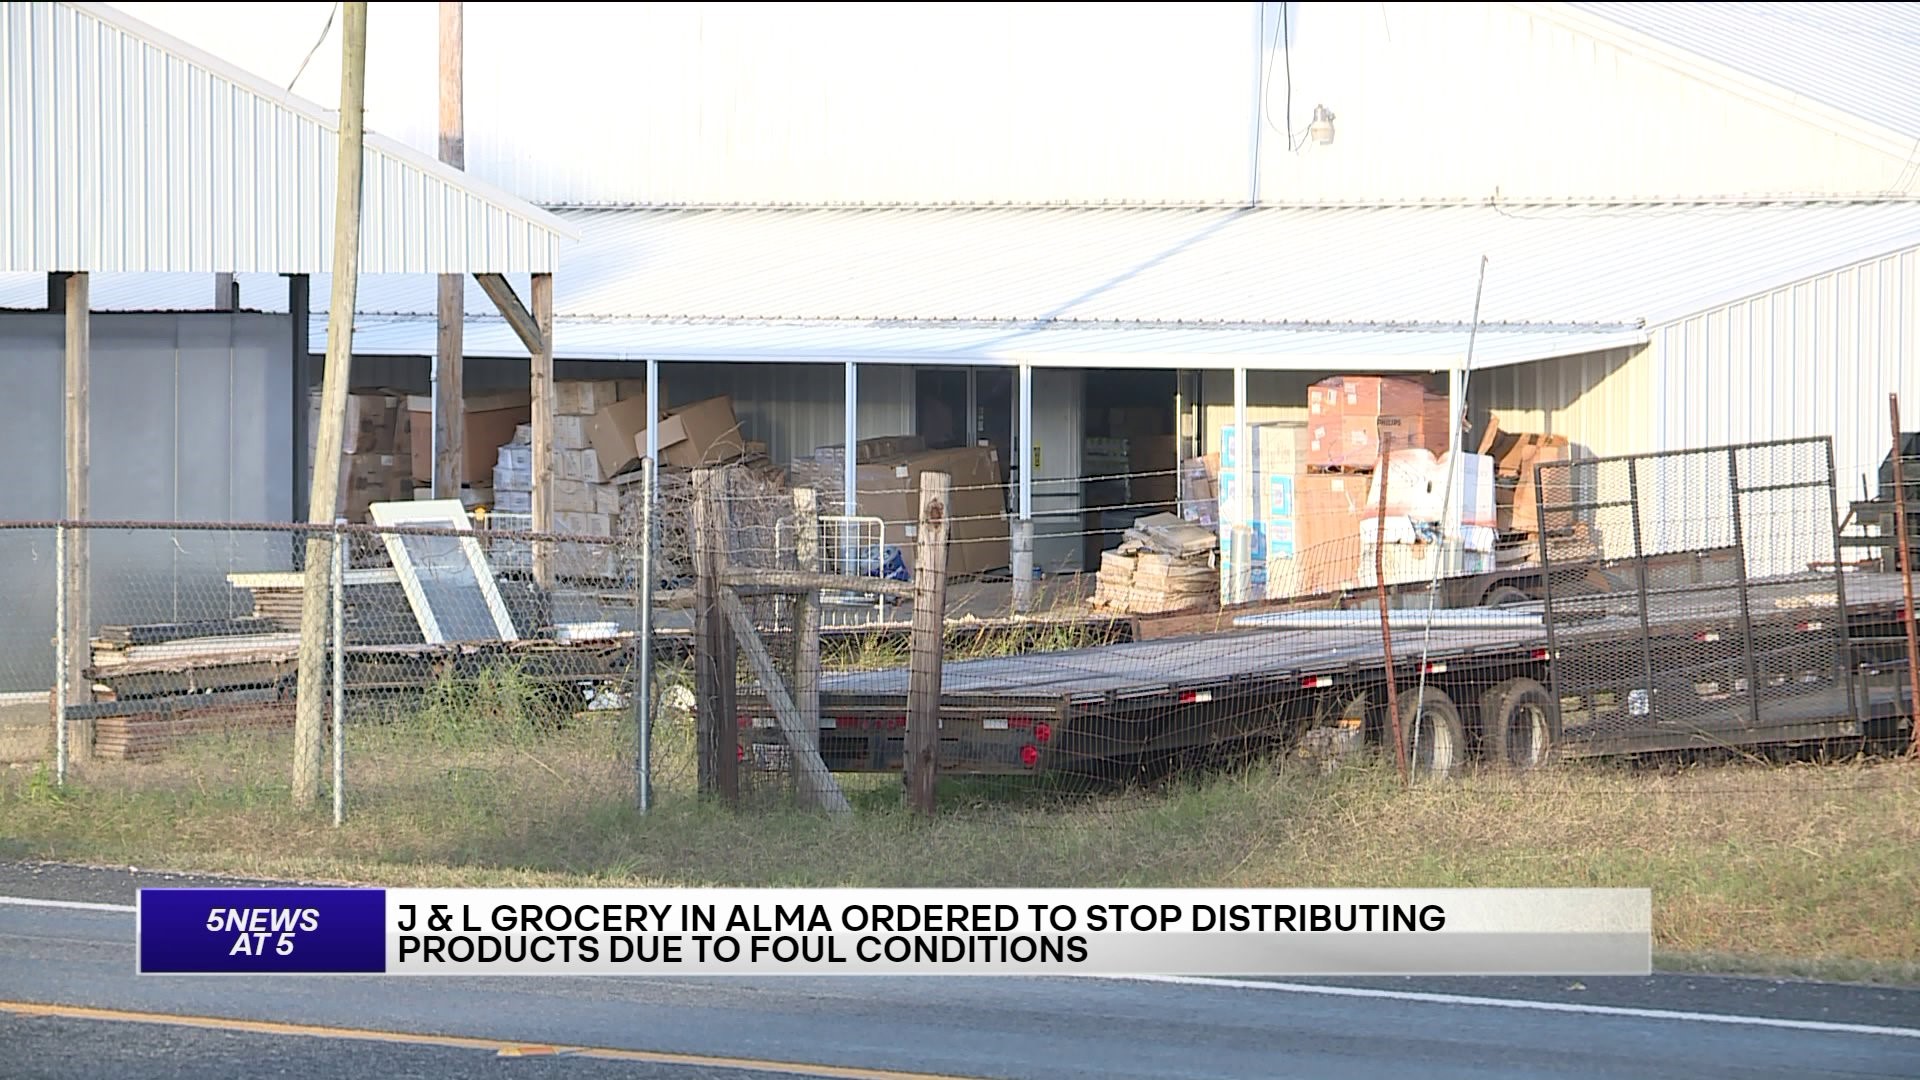 J & L Grocery In Alma Ordered To Stop Distributing Products Due To Foul Conditioins